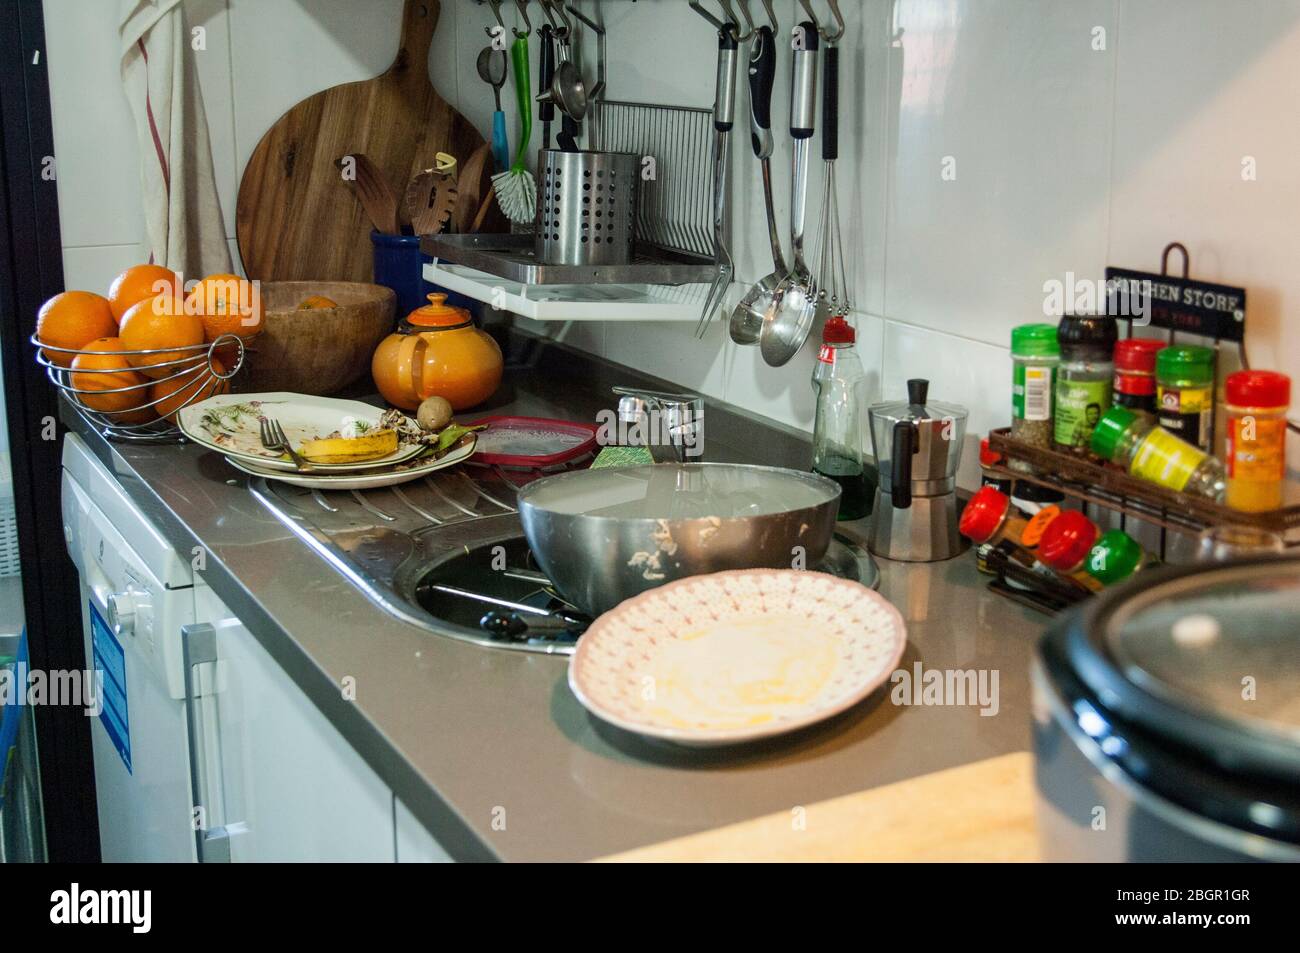 Sink full of dirty dishes Stock Photo